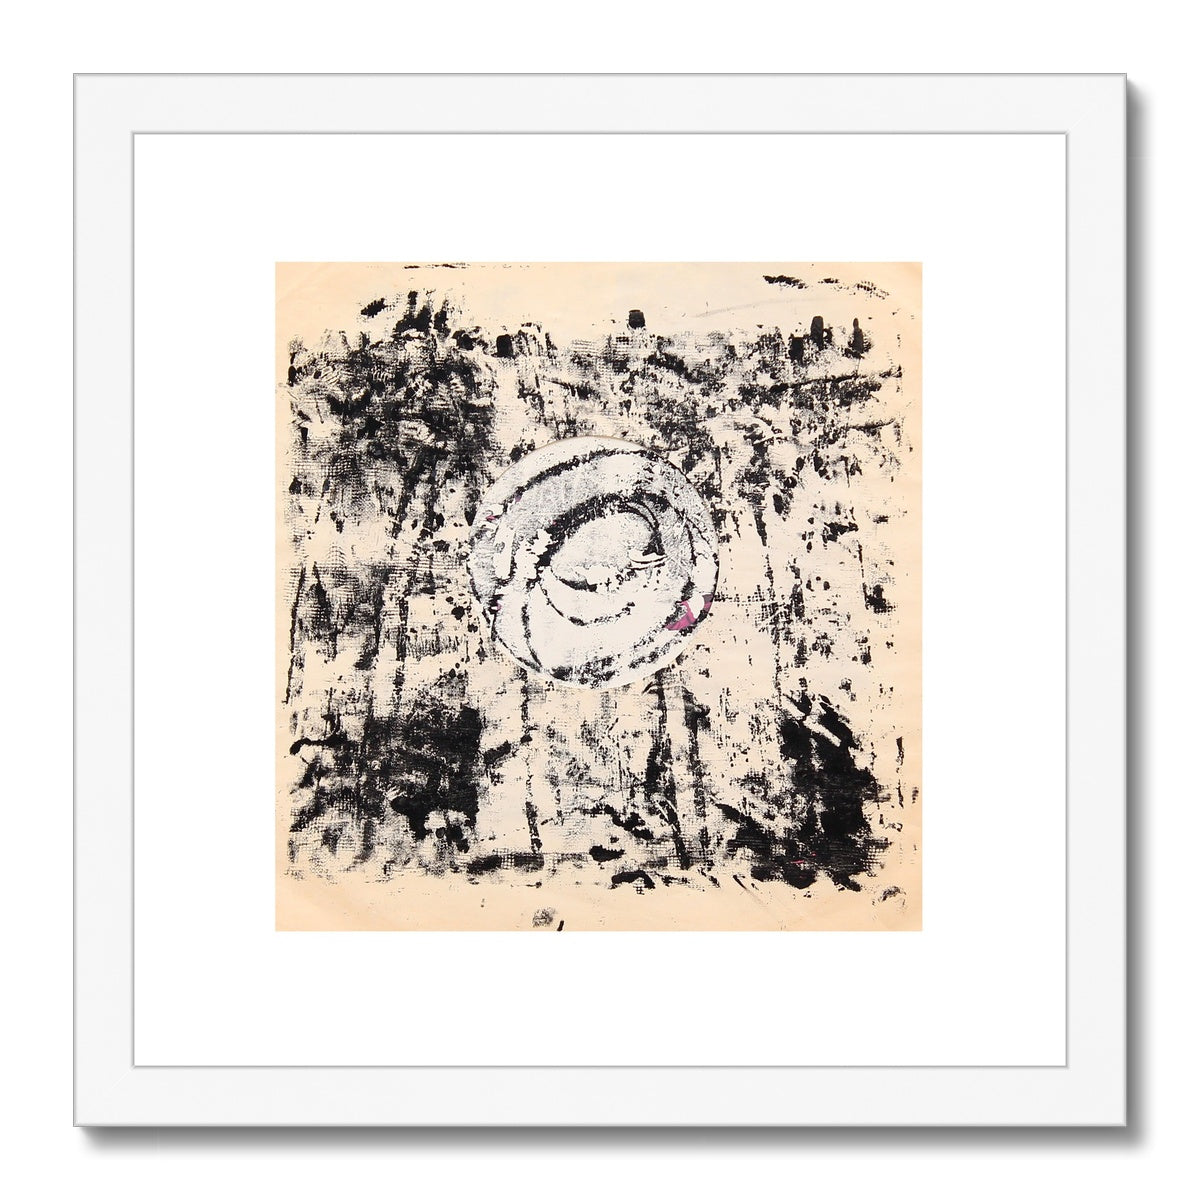 Inhale and exhale 7, Framed & Mounted Print